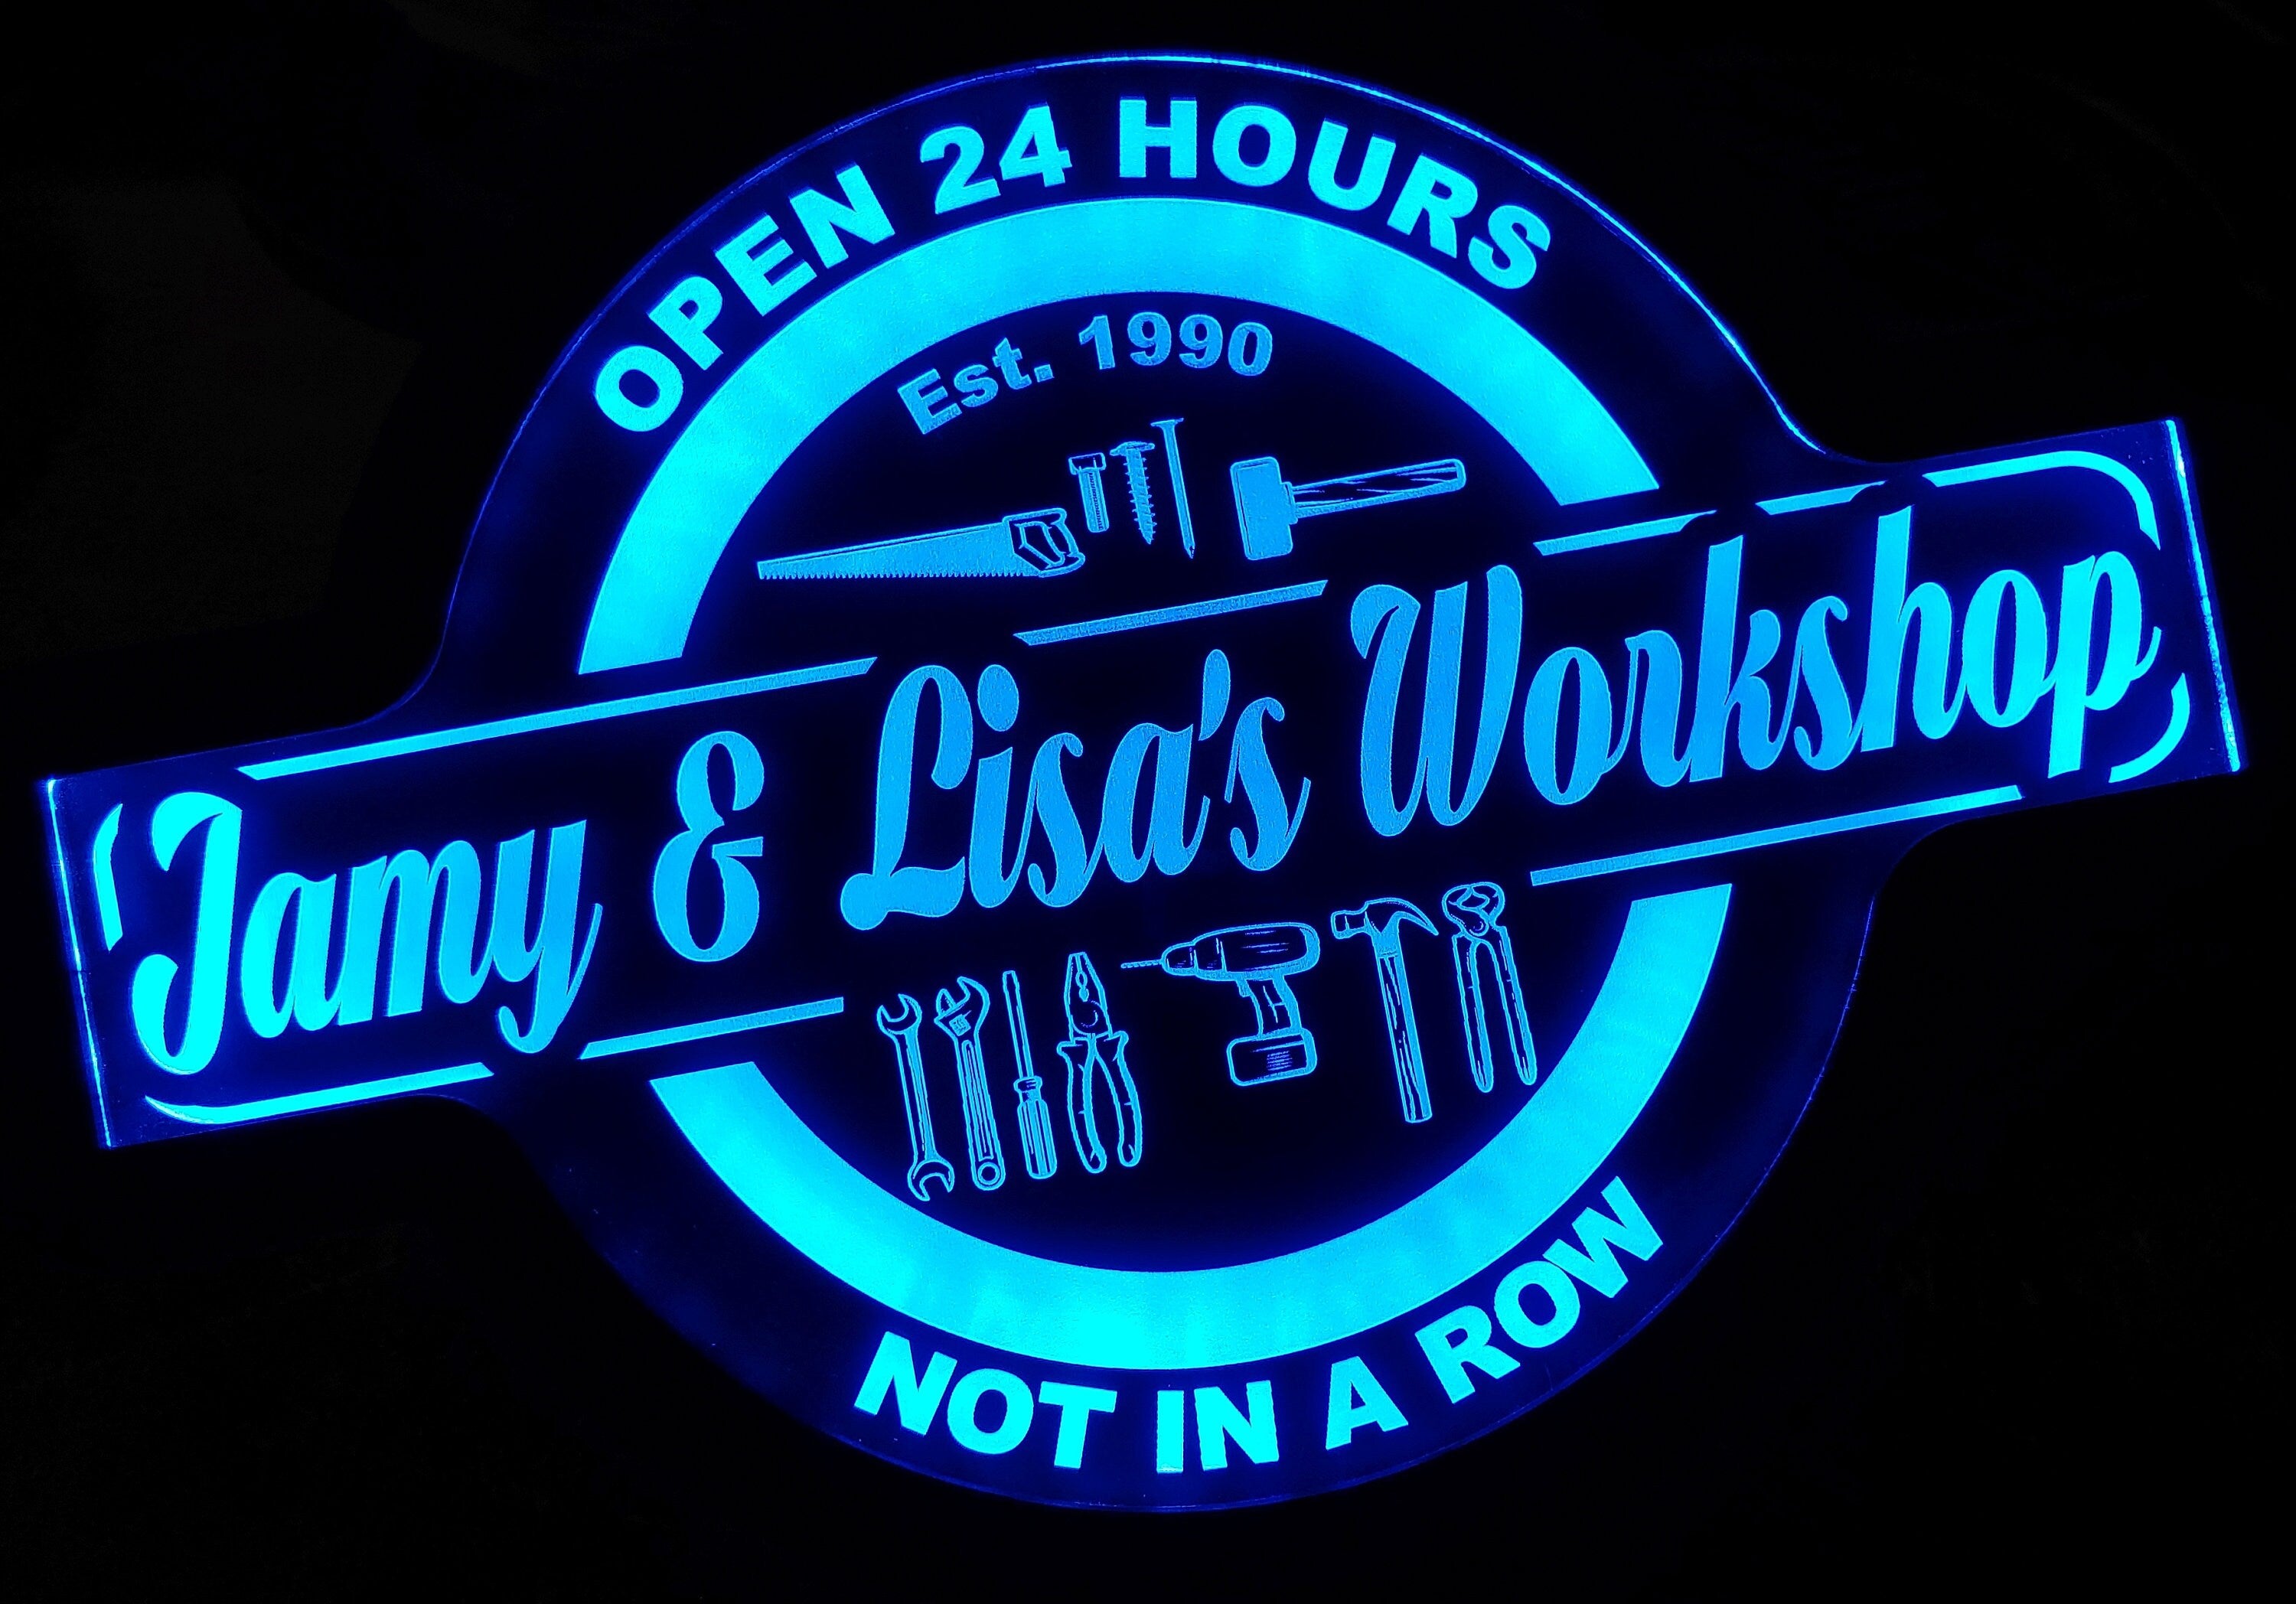 Custom Master Carpenter Led Wall Sign Neon Like - Color Changing Remote Control - 4 Sizes Free Shipping